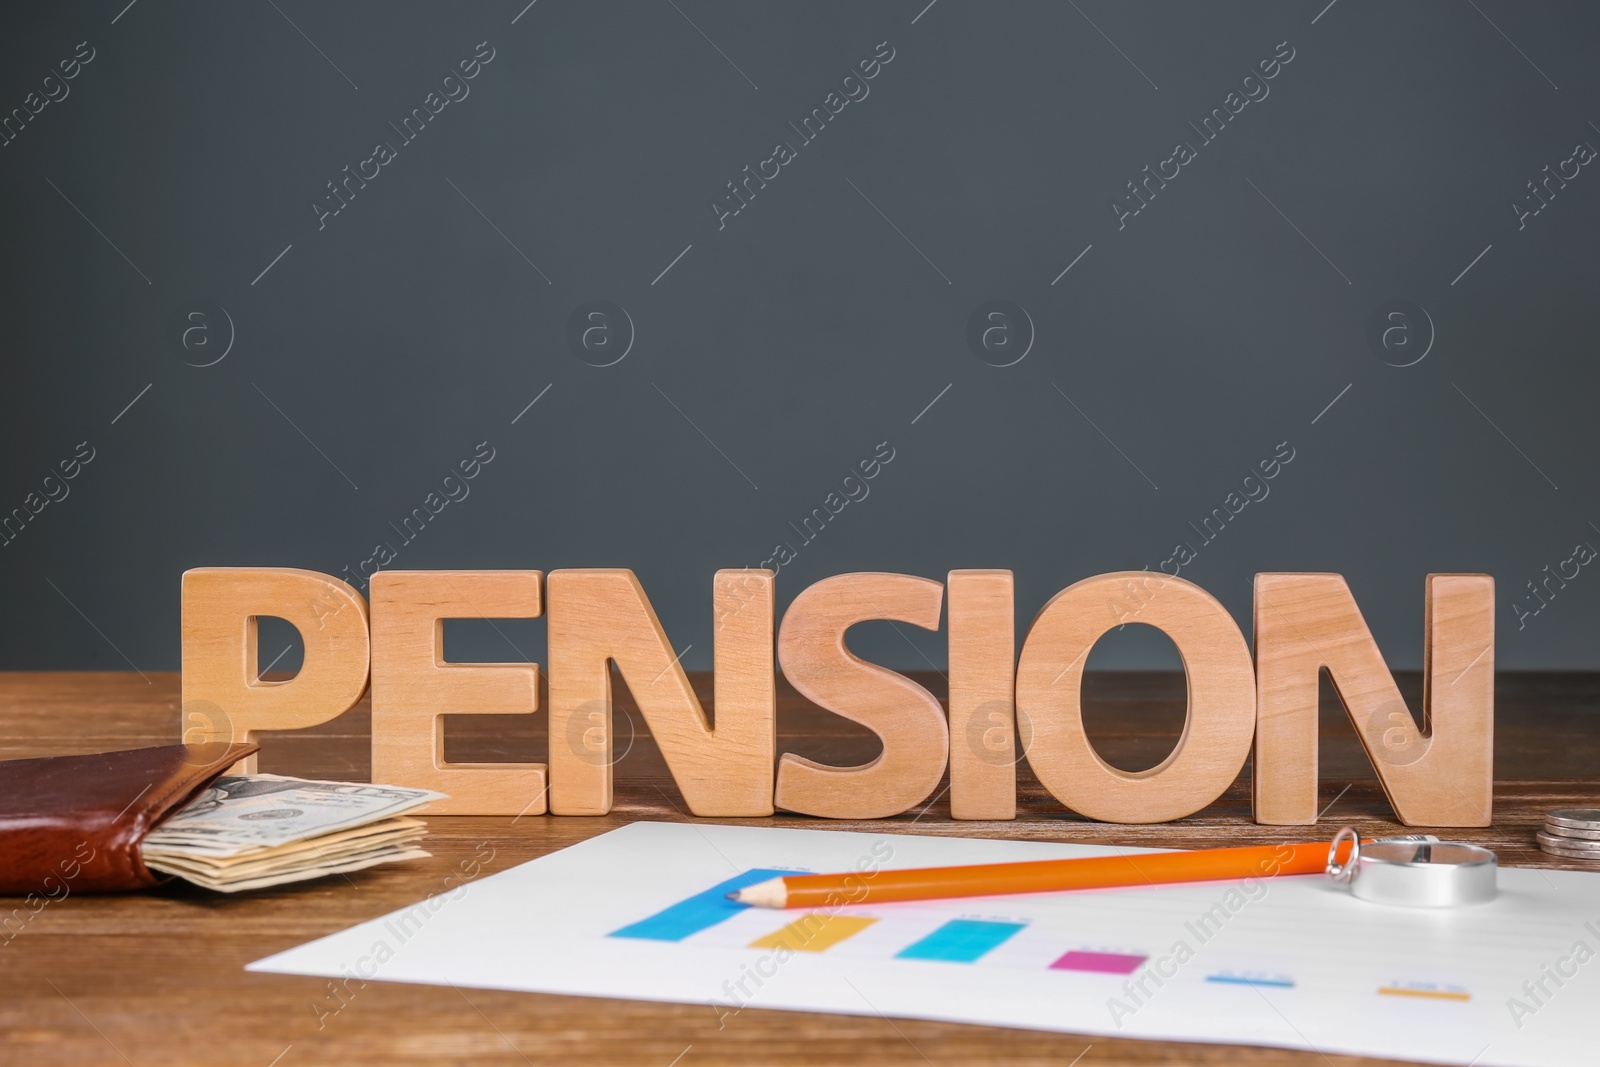 Photo of Composition with word "PENSION" made of letters on table